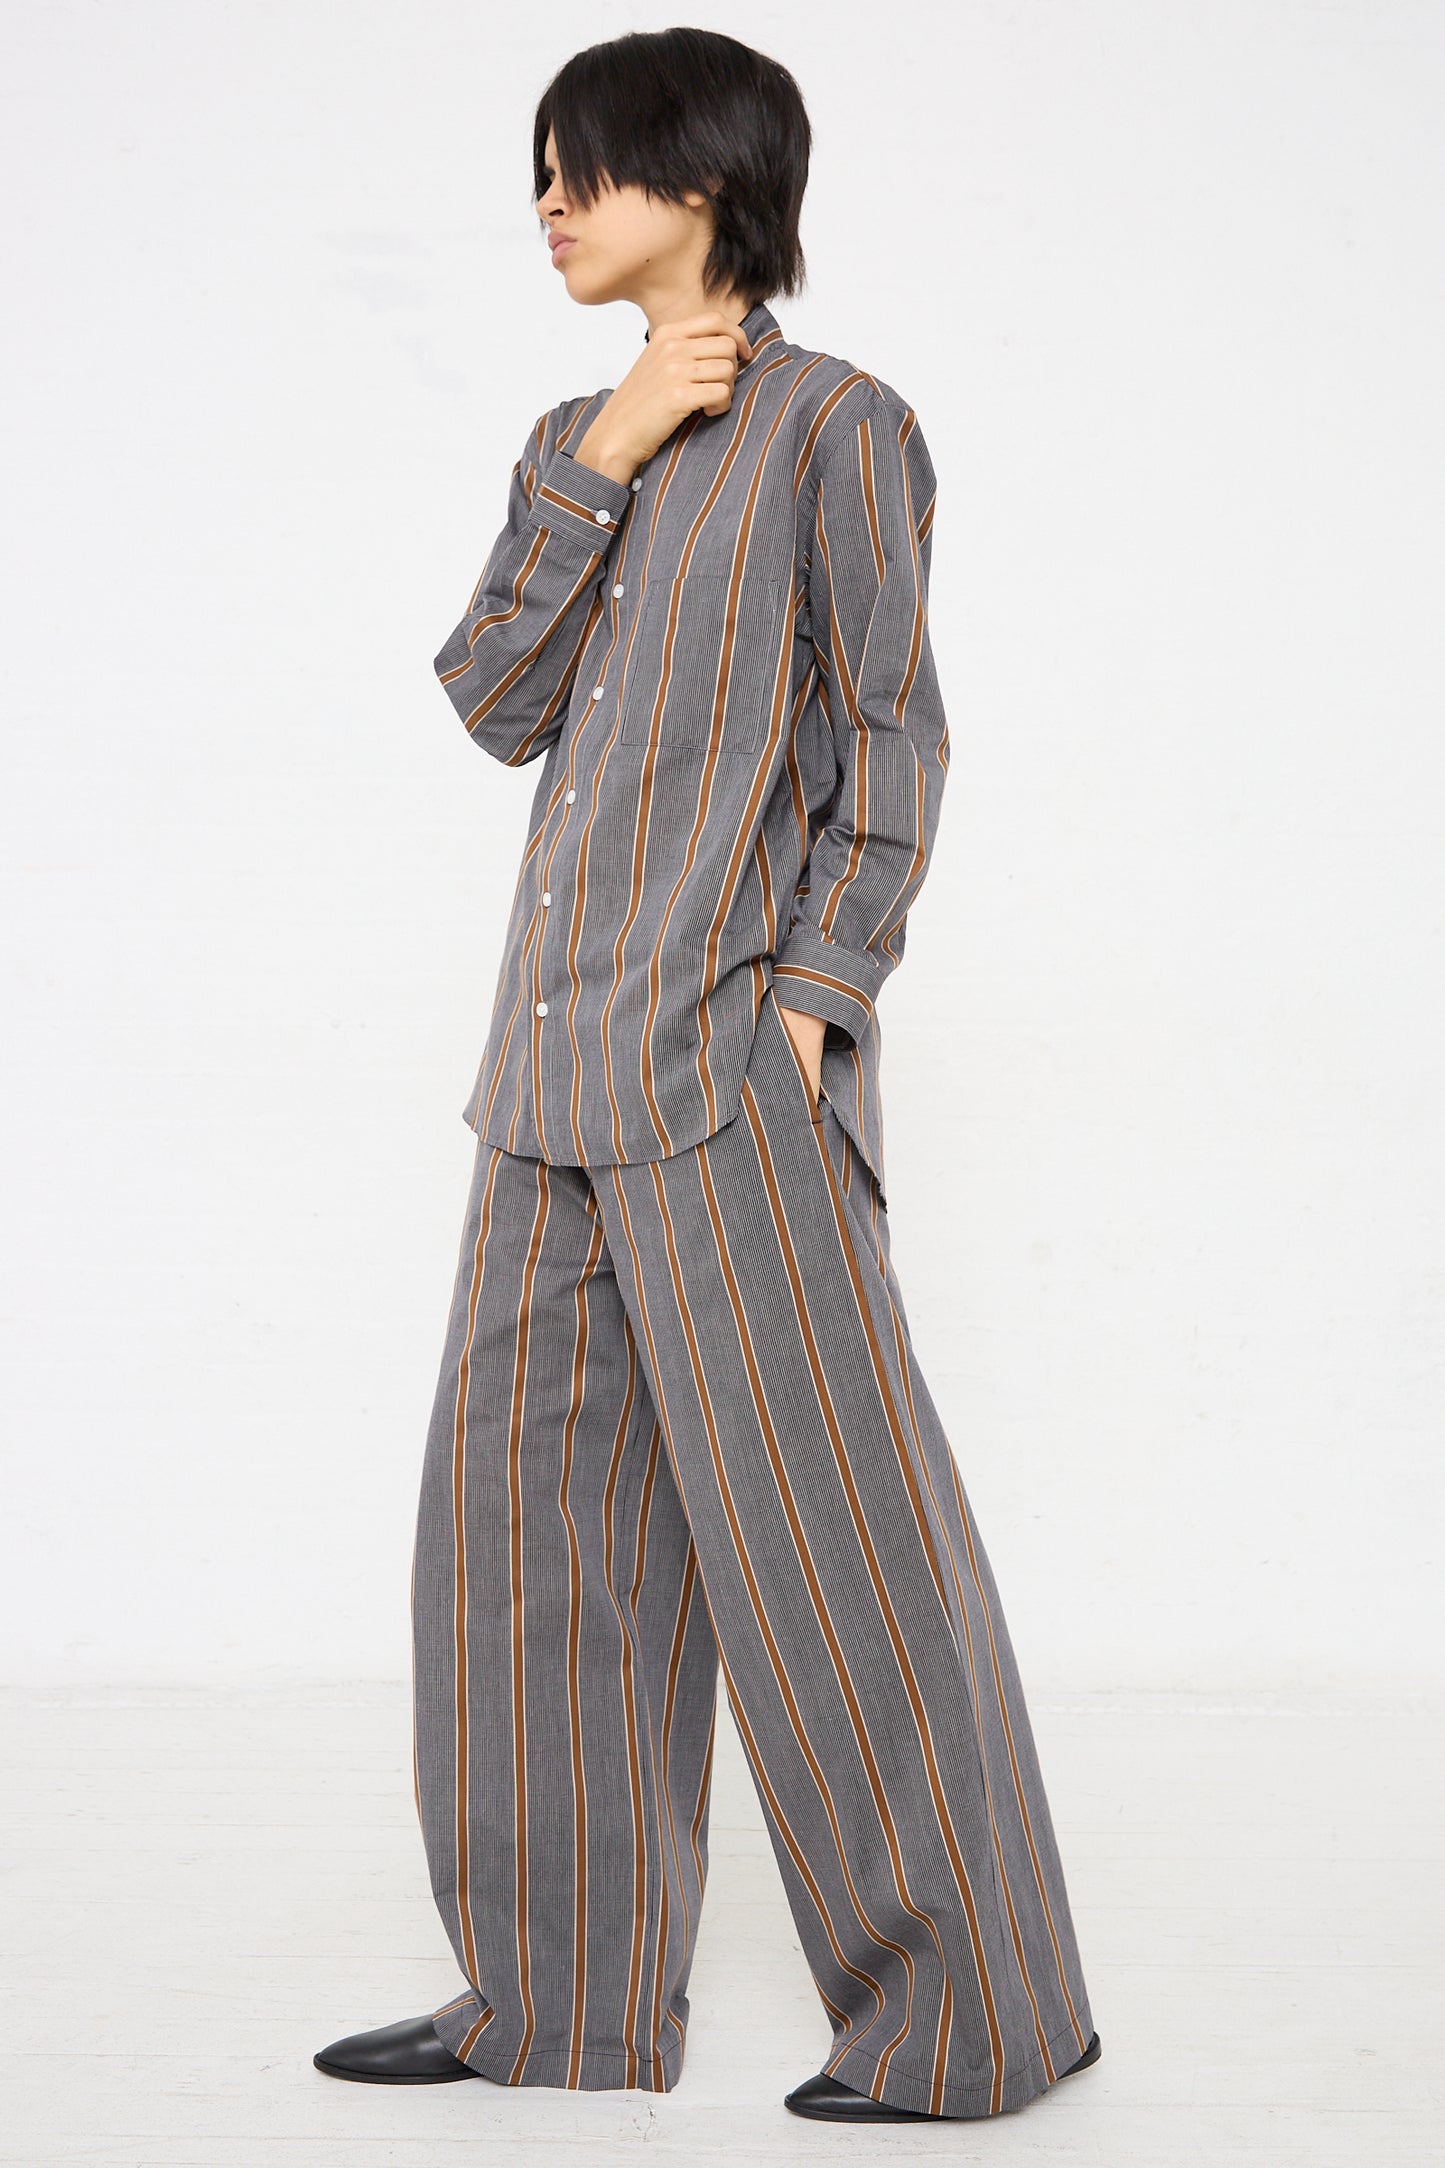 The model is wearing a Cristaseya Maxi Large Pant in Striped Black and Noisette pajama set with wide leg and oversized drawstring pants.